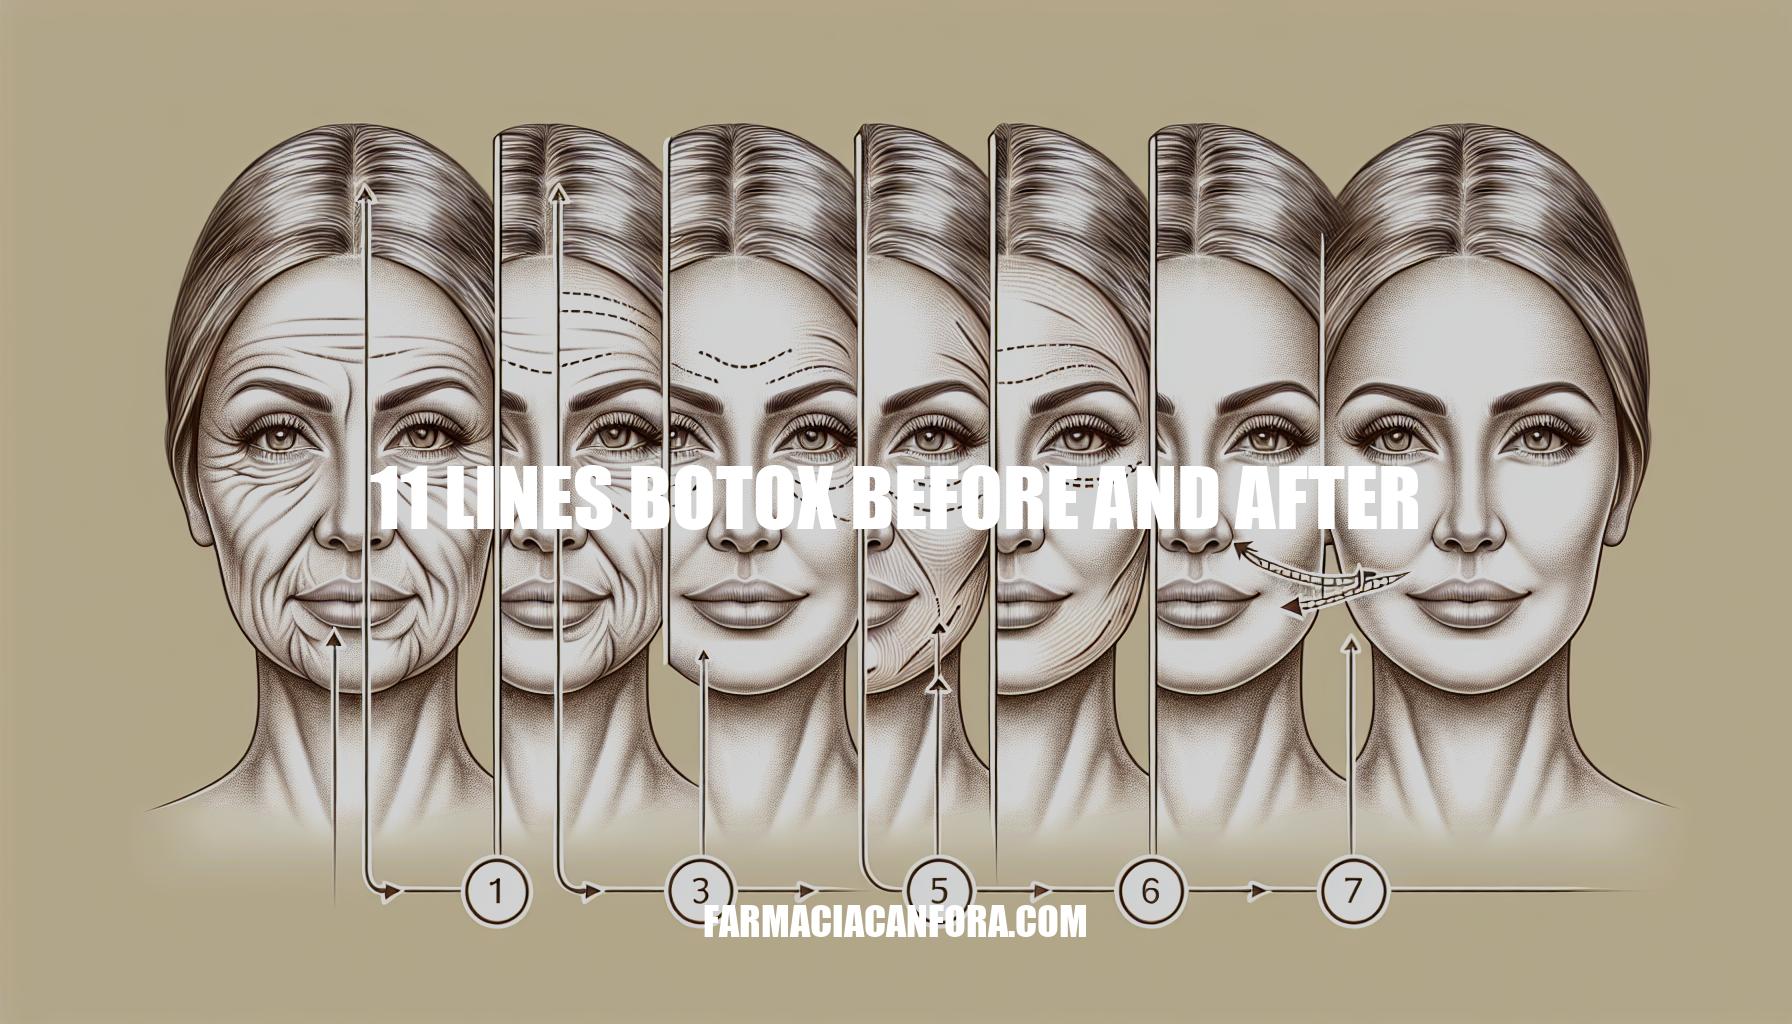 11 Lines Botox Before and After: Complete Guide